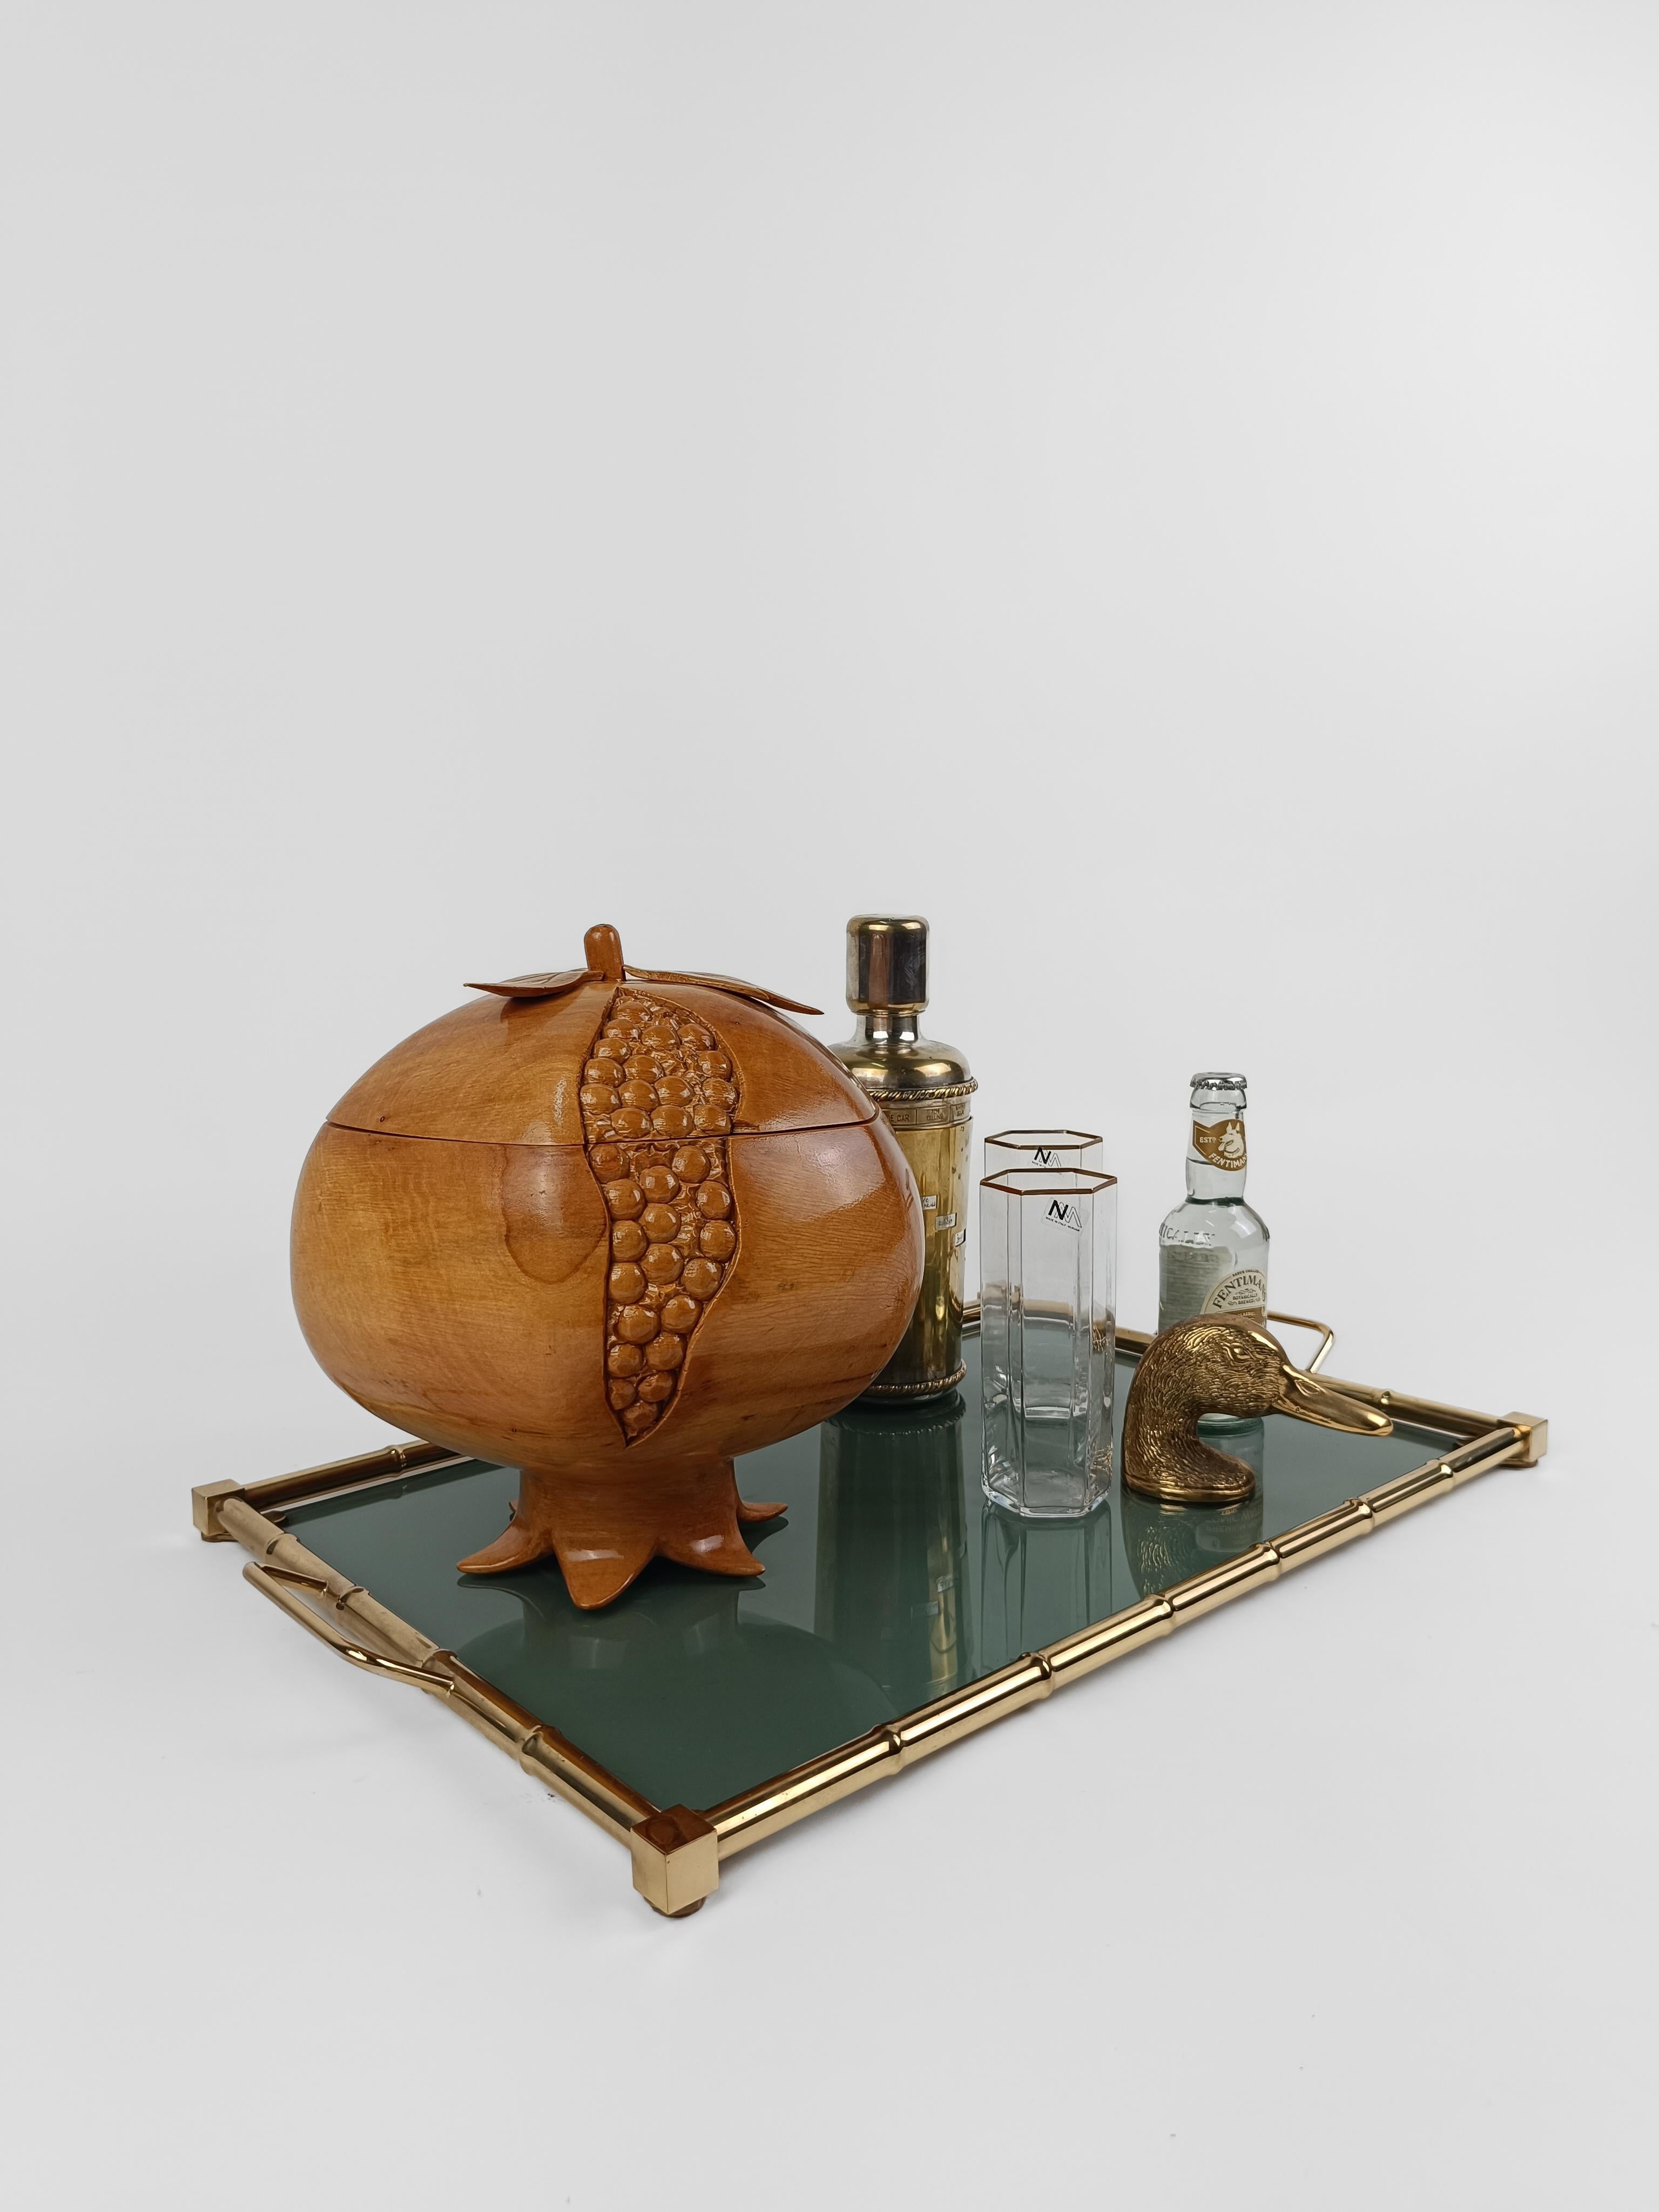 Sculptural Vintage Ice Bucket in maple wood carved in the shape of a pomegranate 9